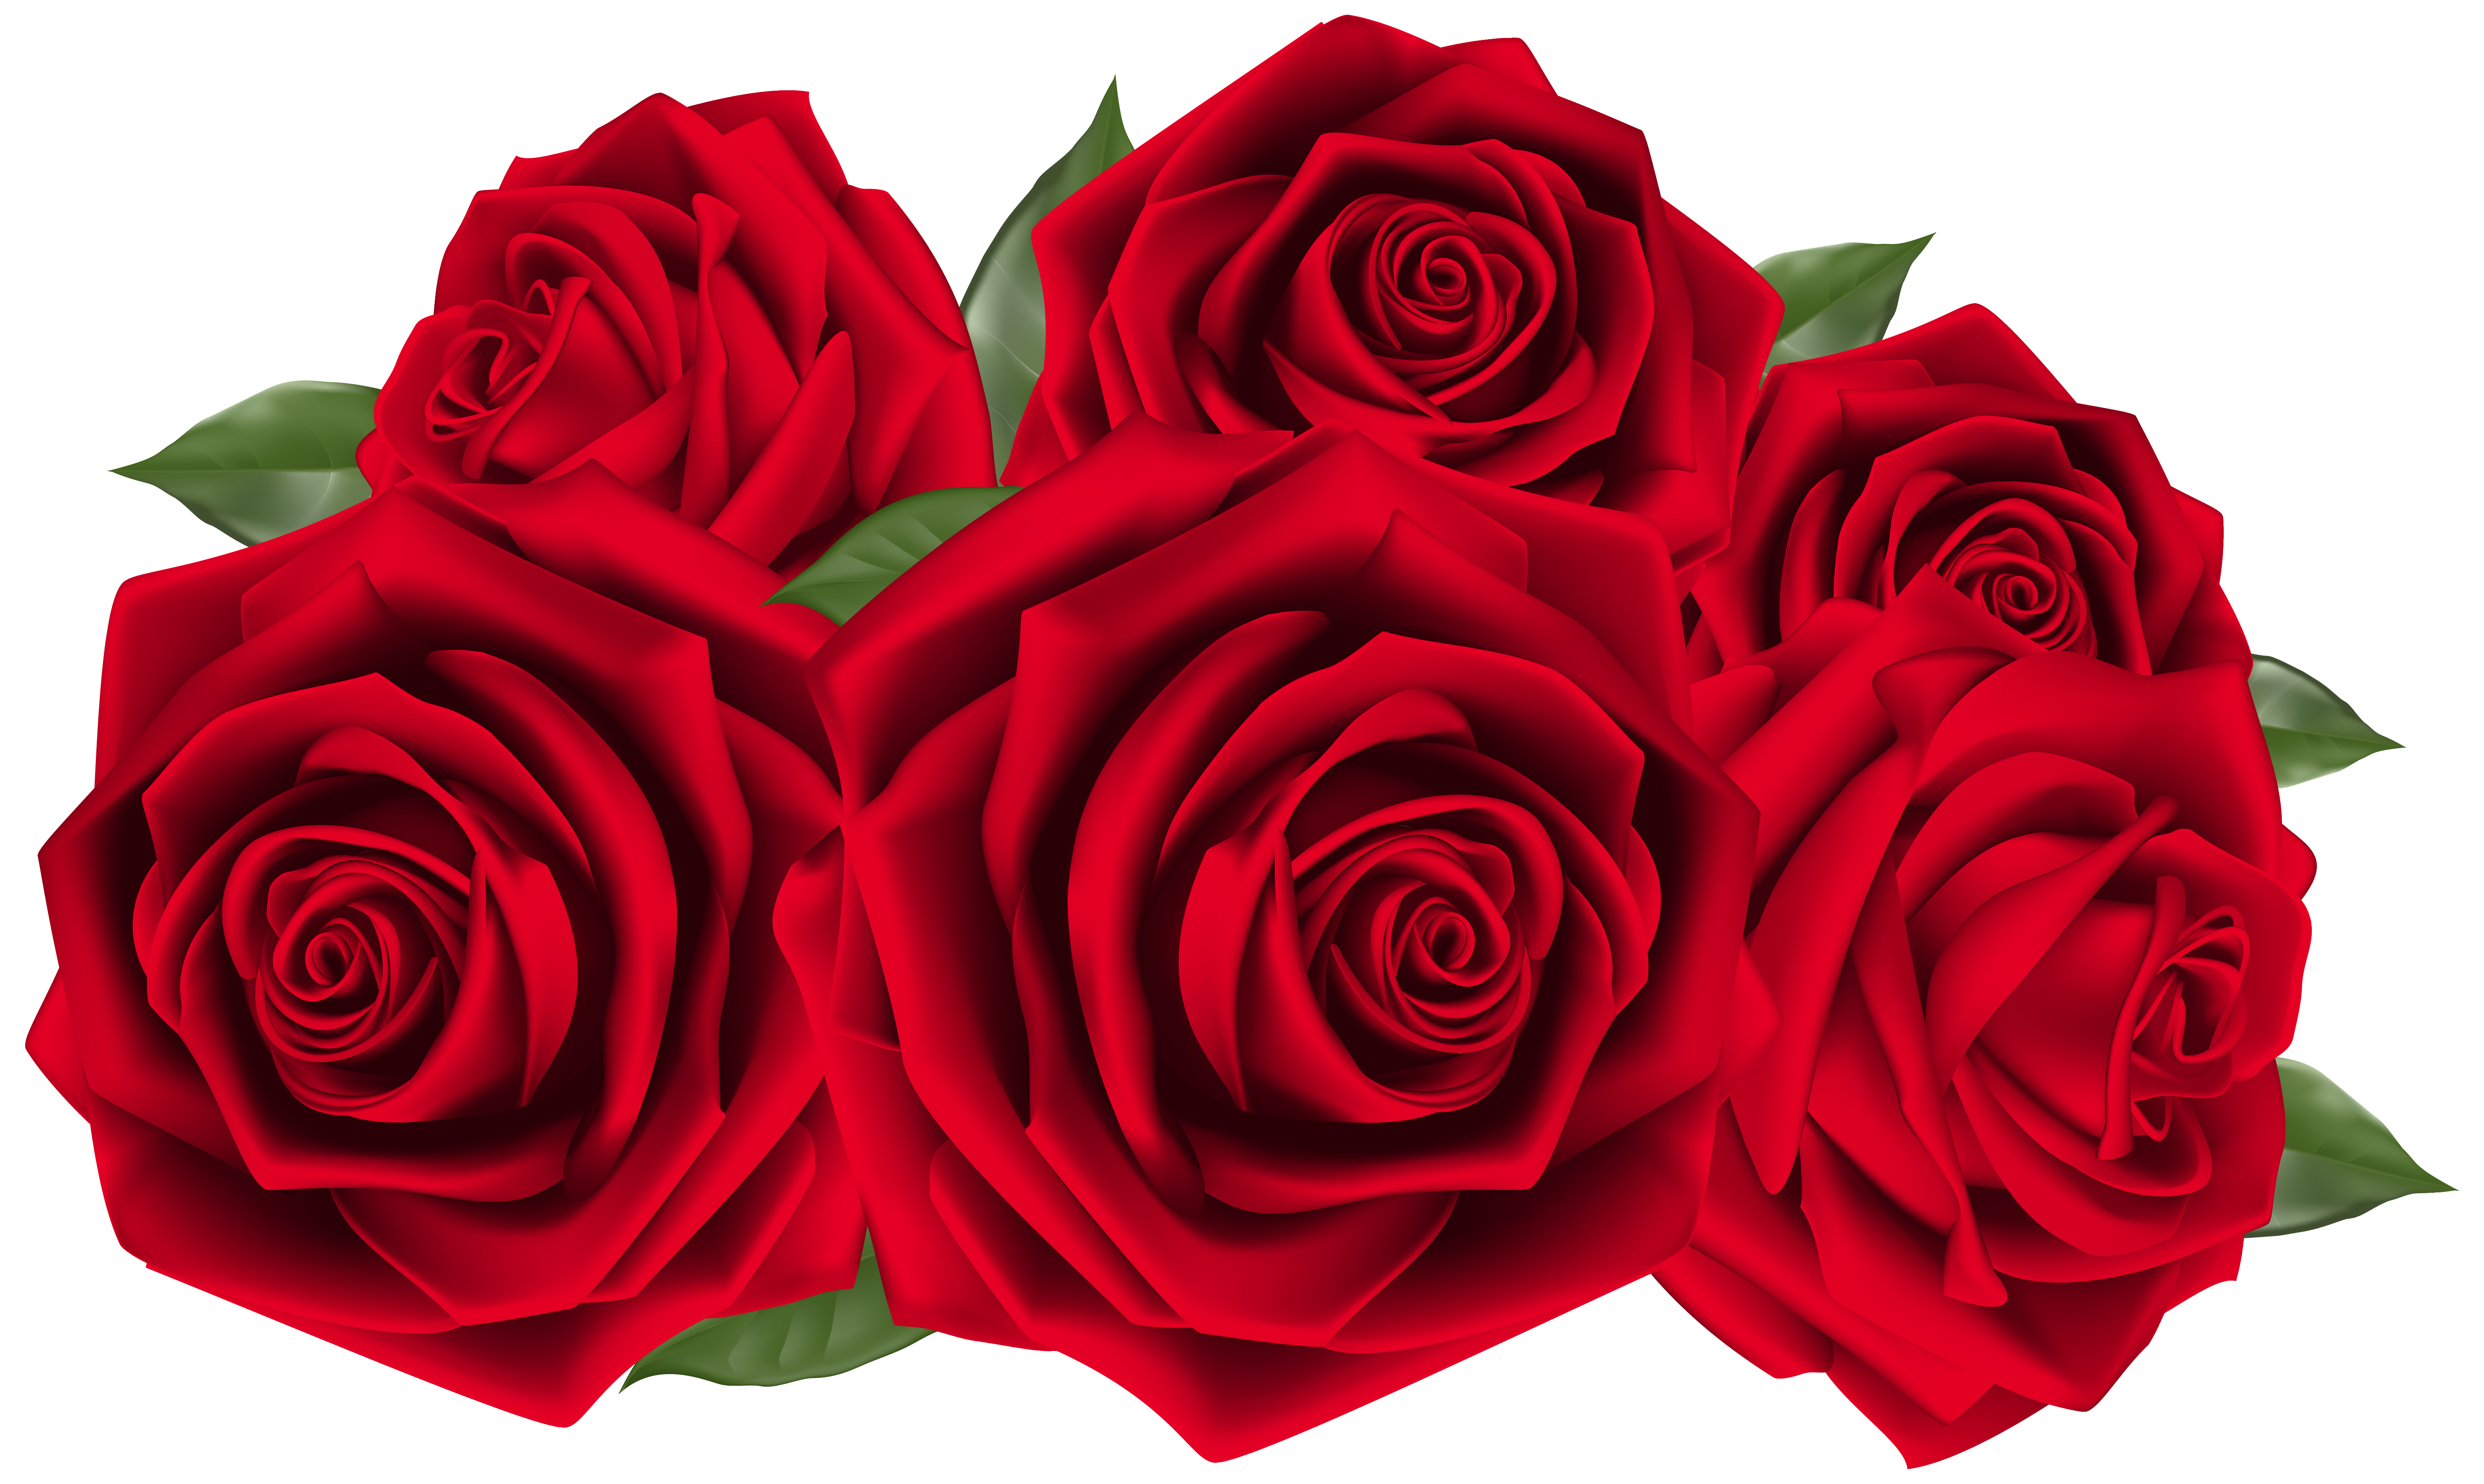 clipart images of red roses - photo #27